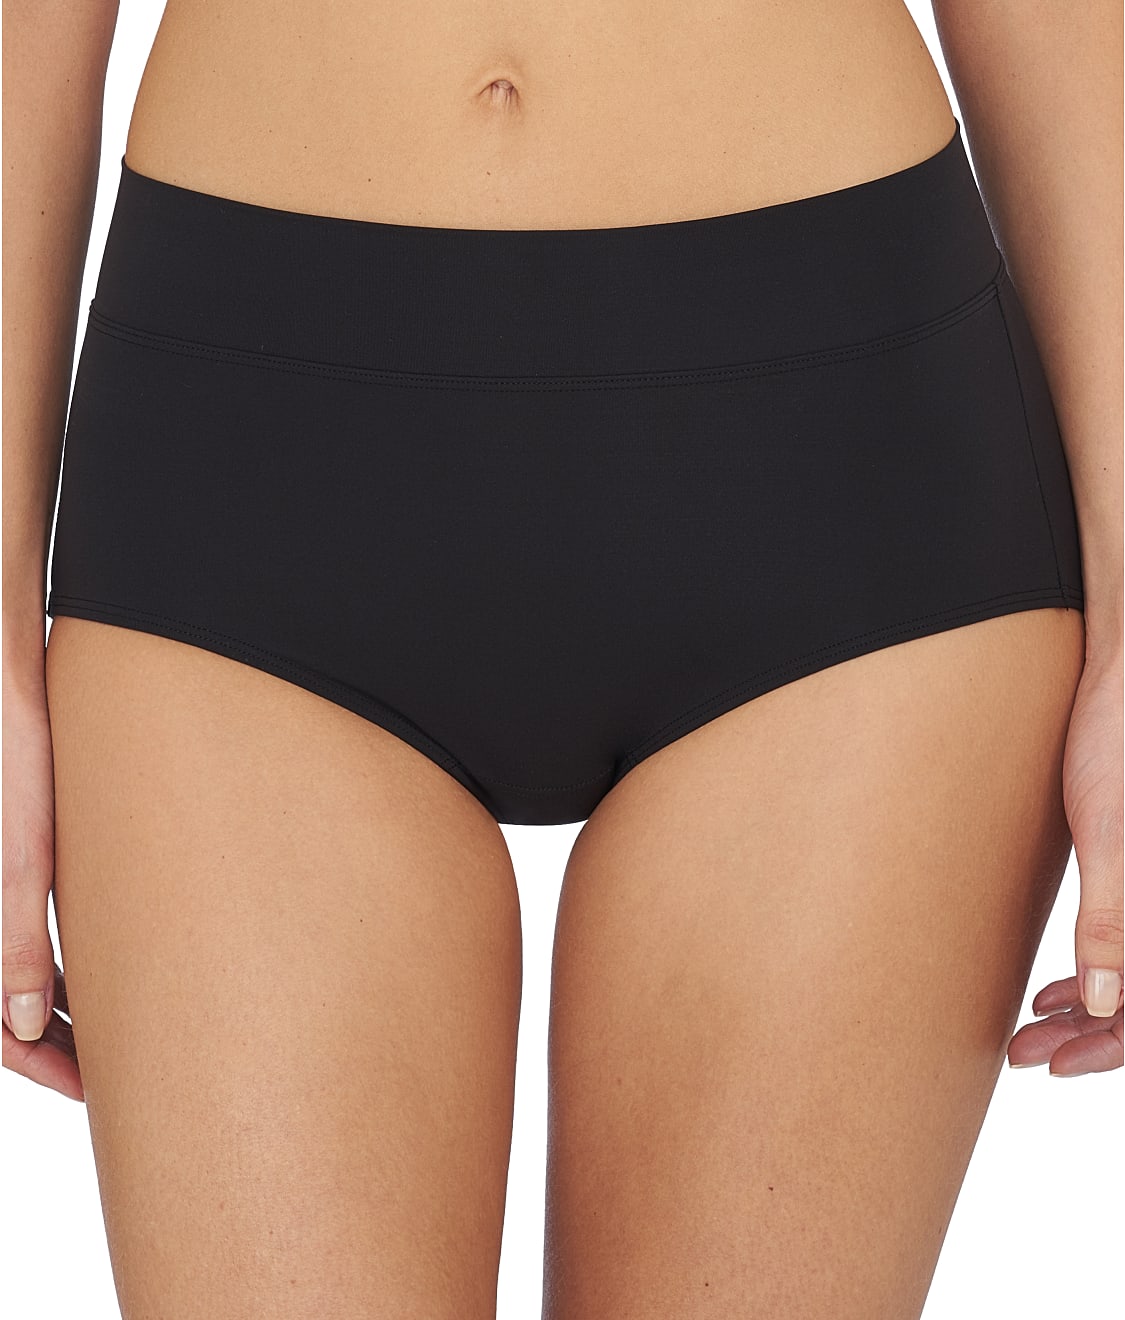 Buy Bliss Perfection Maternity Brief and Underwear Gifts - Shop